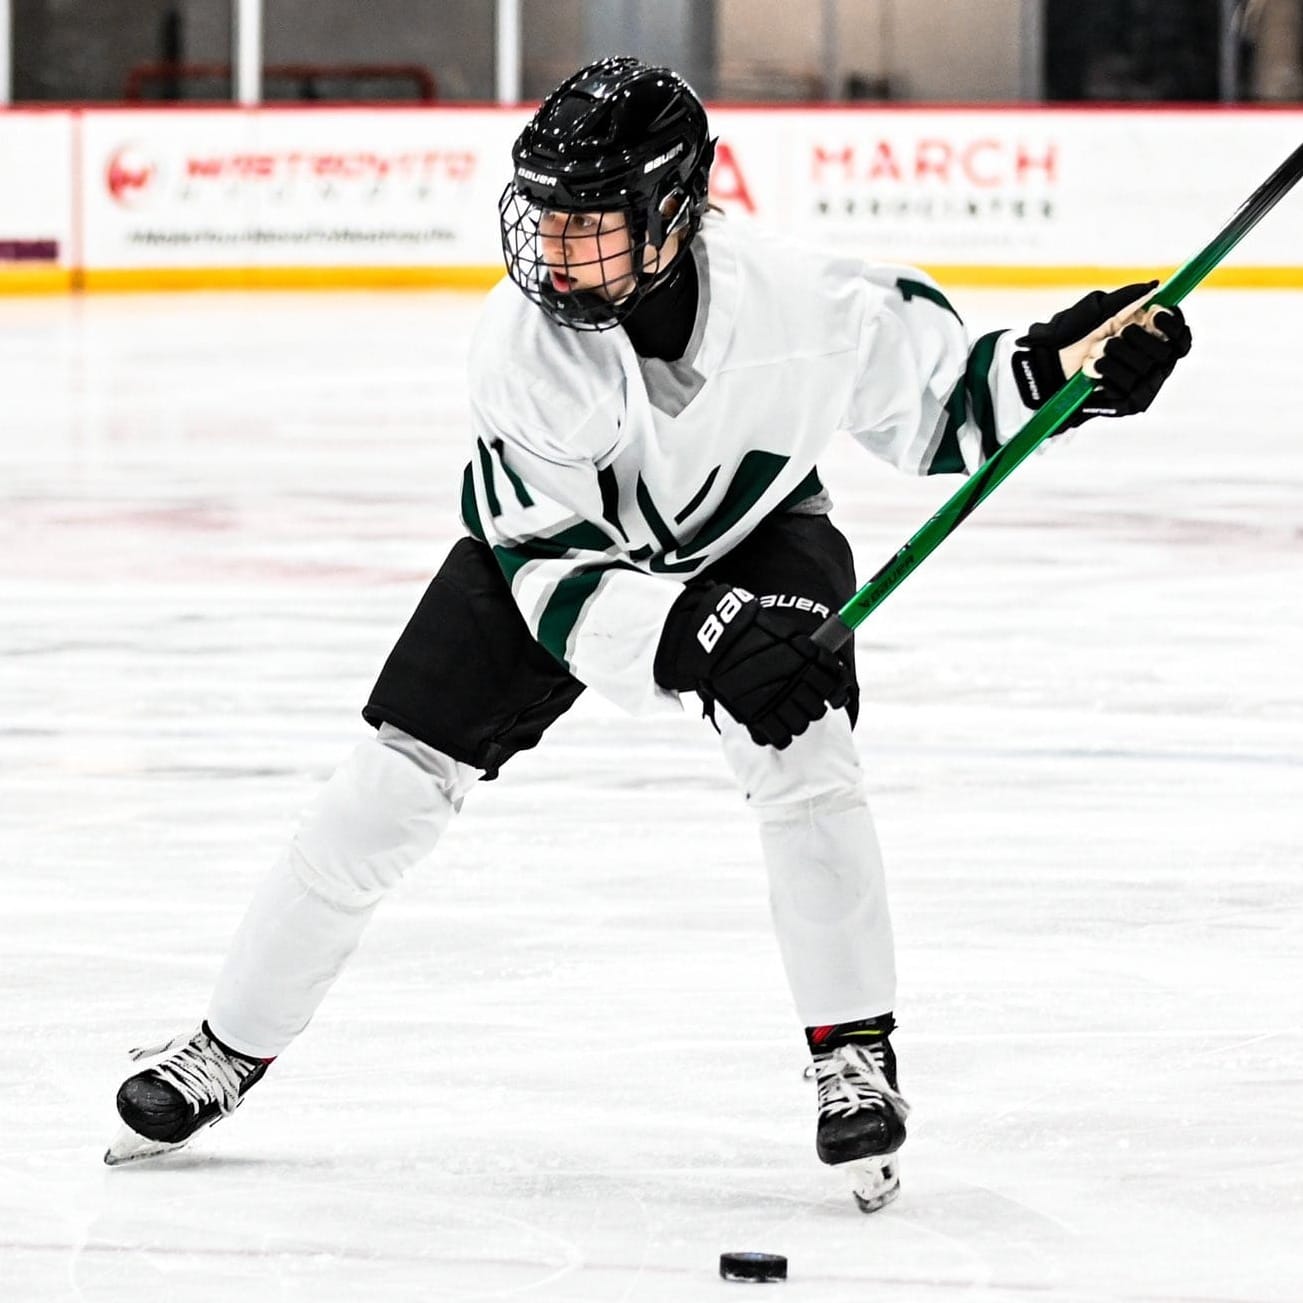 Alina Müller winds up for a slap shot during a PWHL pre-season game.